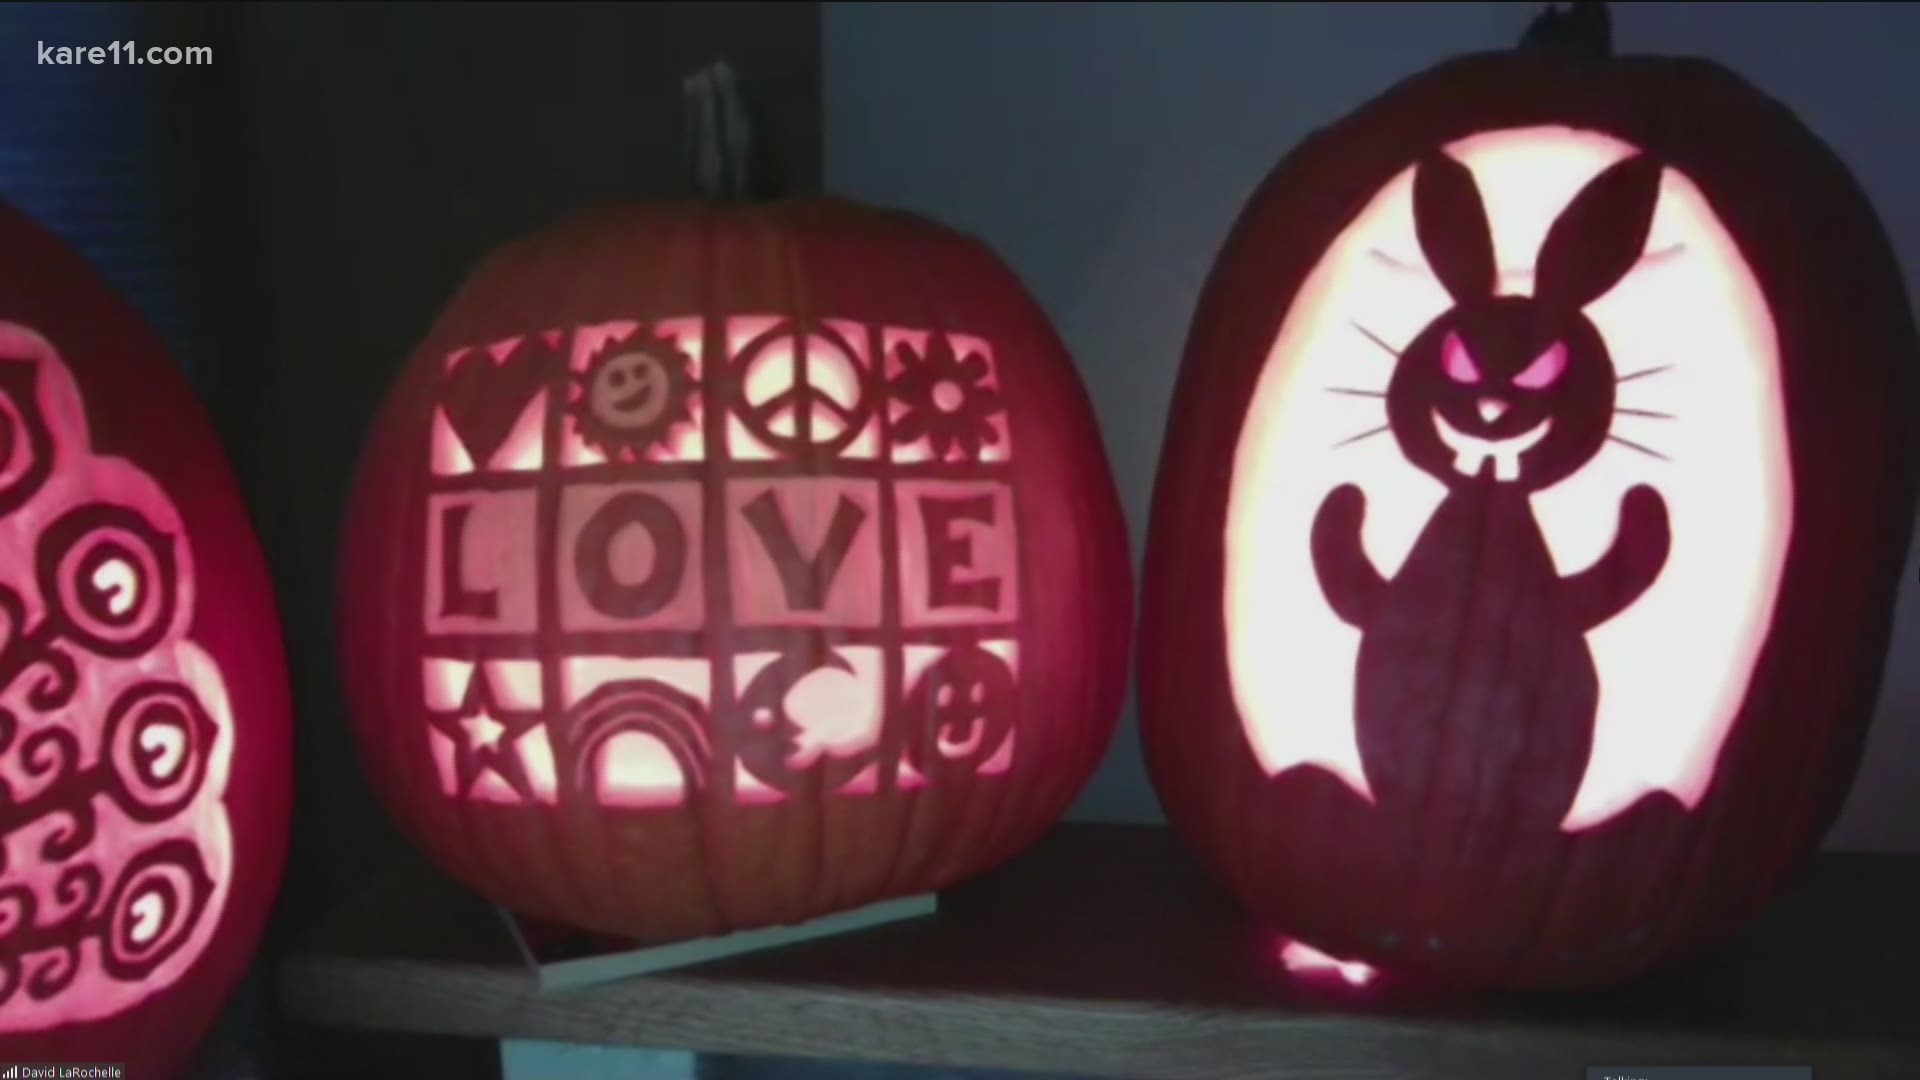 Check out some new pumpkin carving ideas.